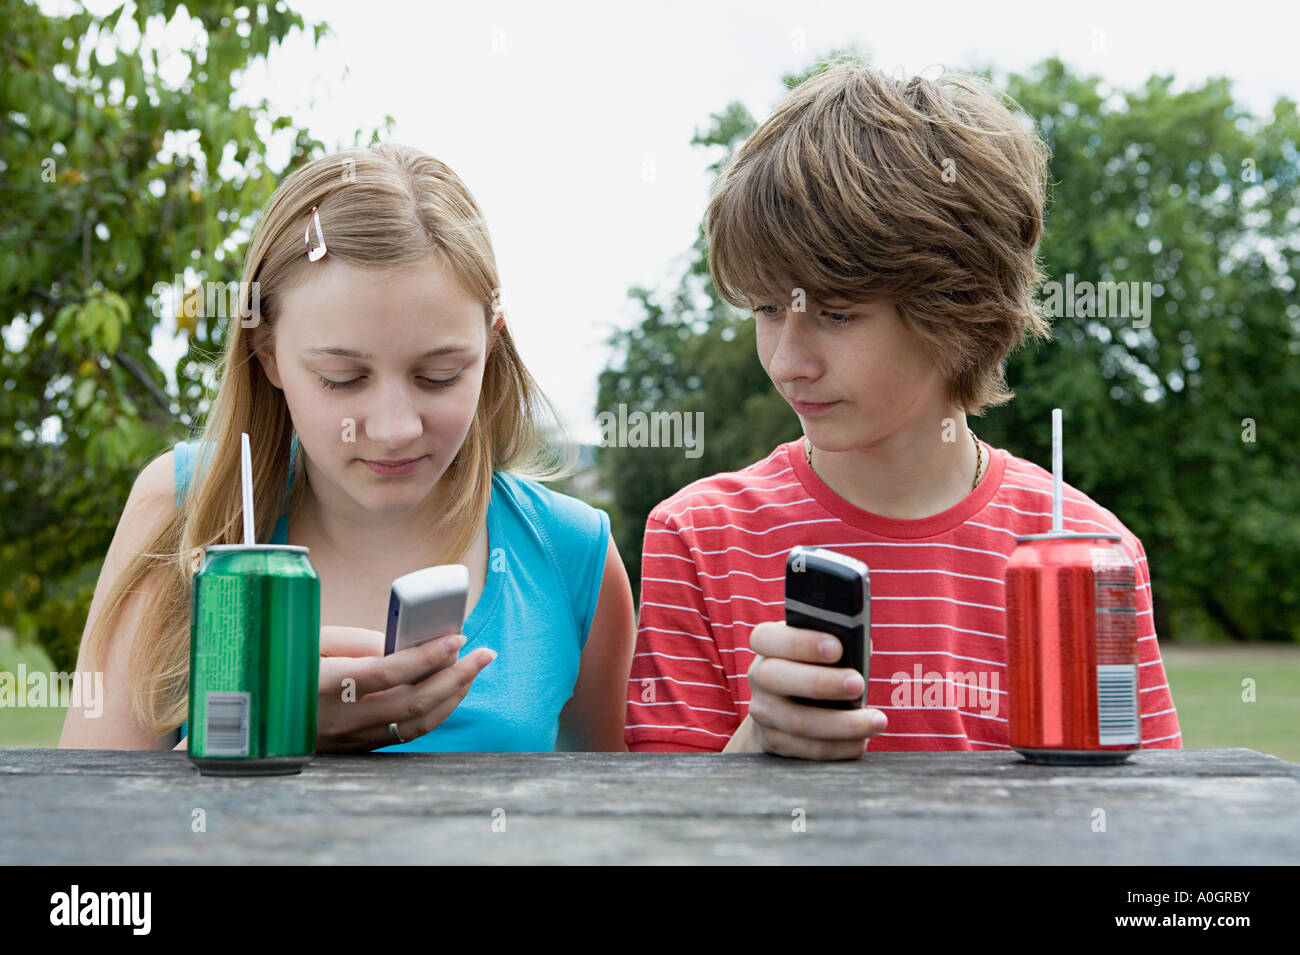 Teenagers with cellphones Stock Photo